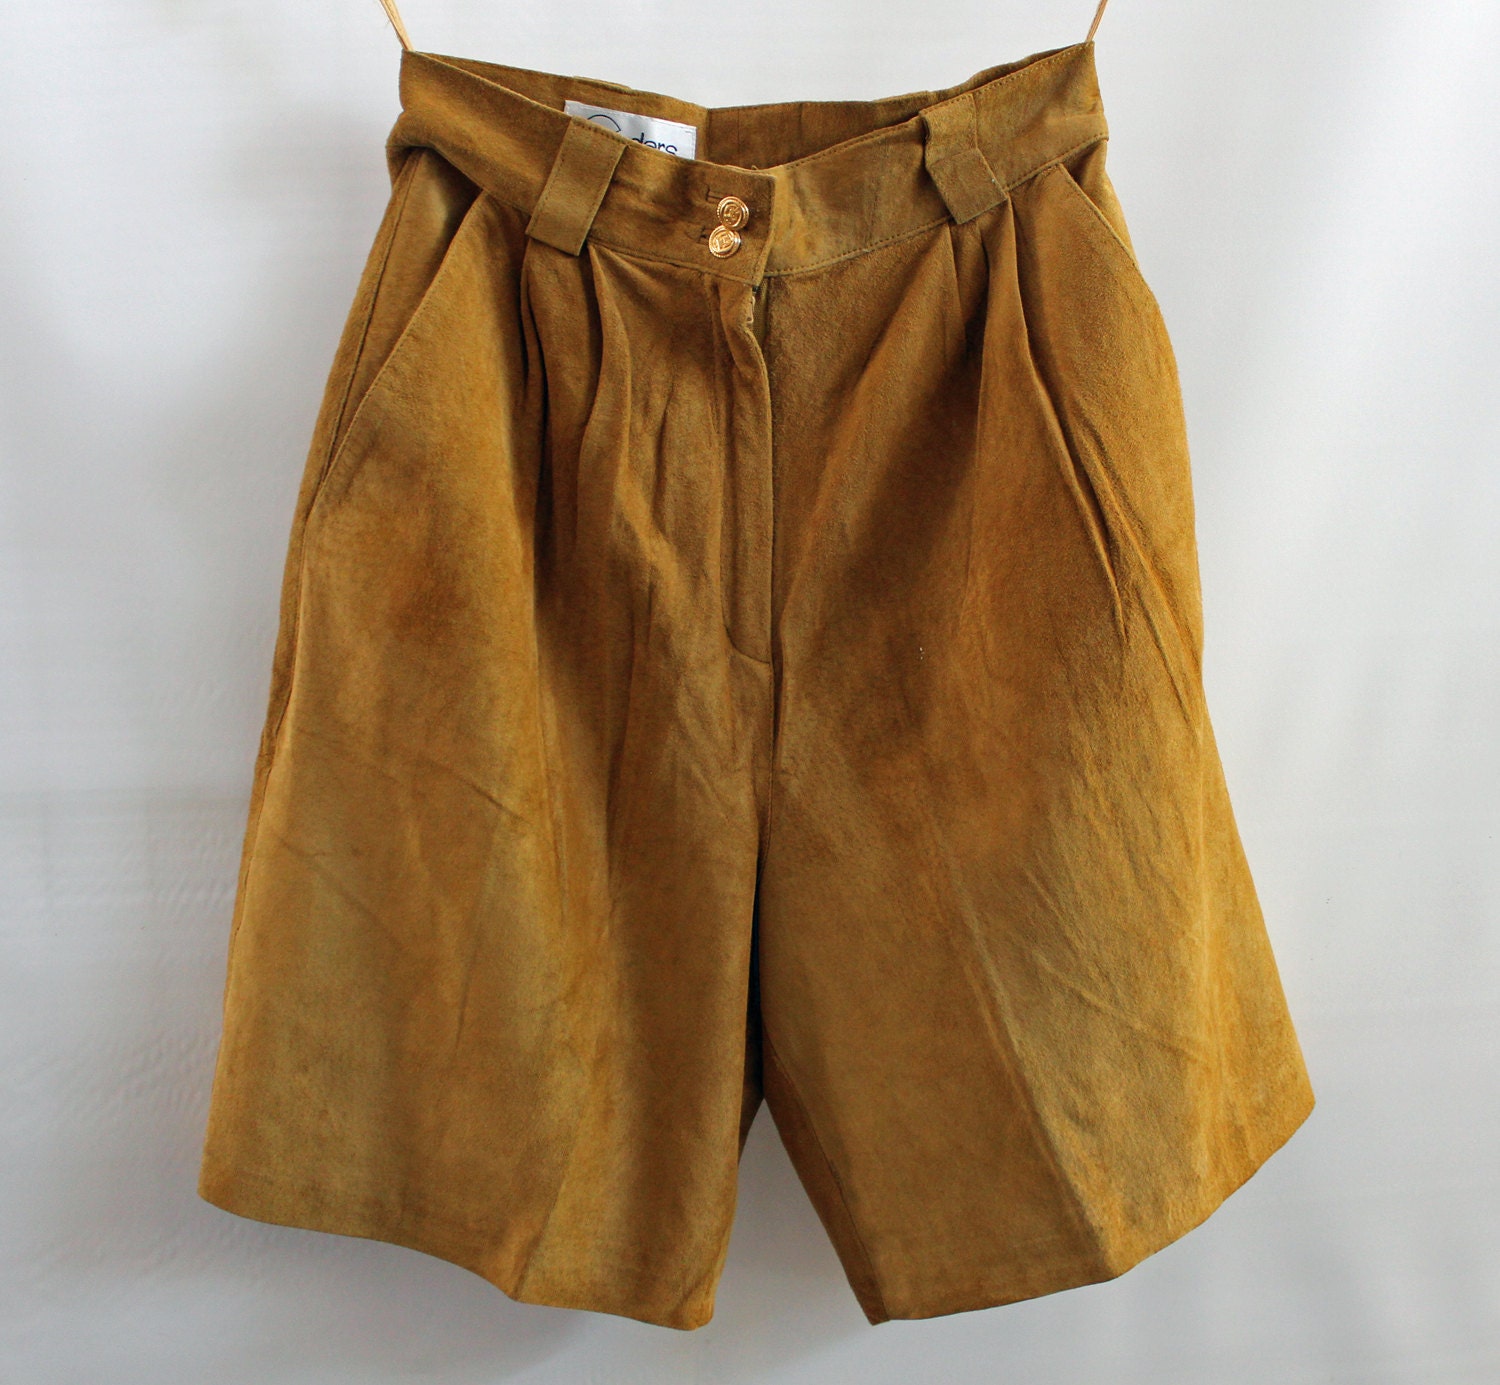 1980s Suede Walking Shorts / Size 10 / Gold / by ChicChixVintage